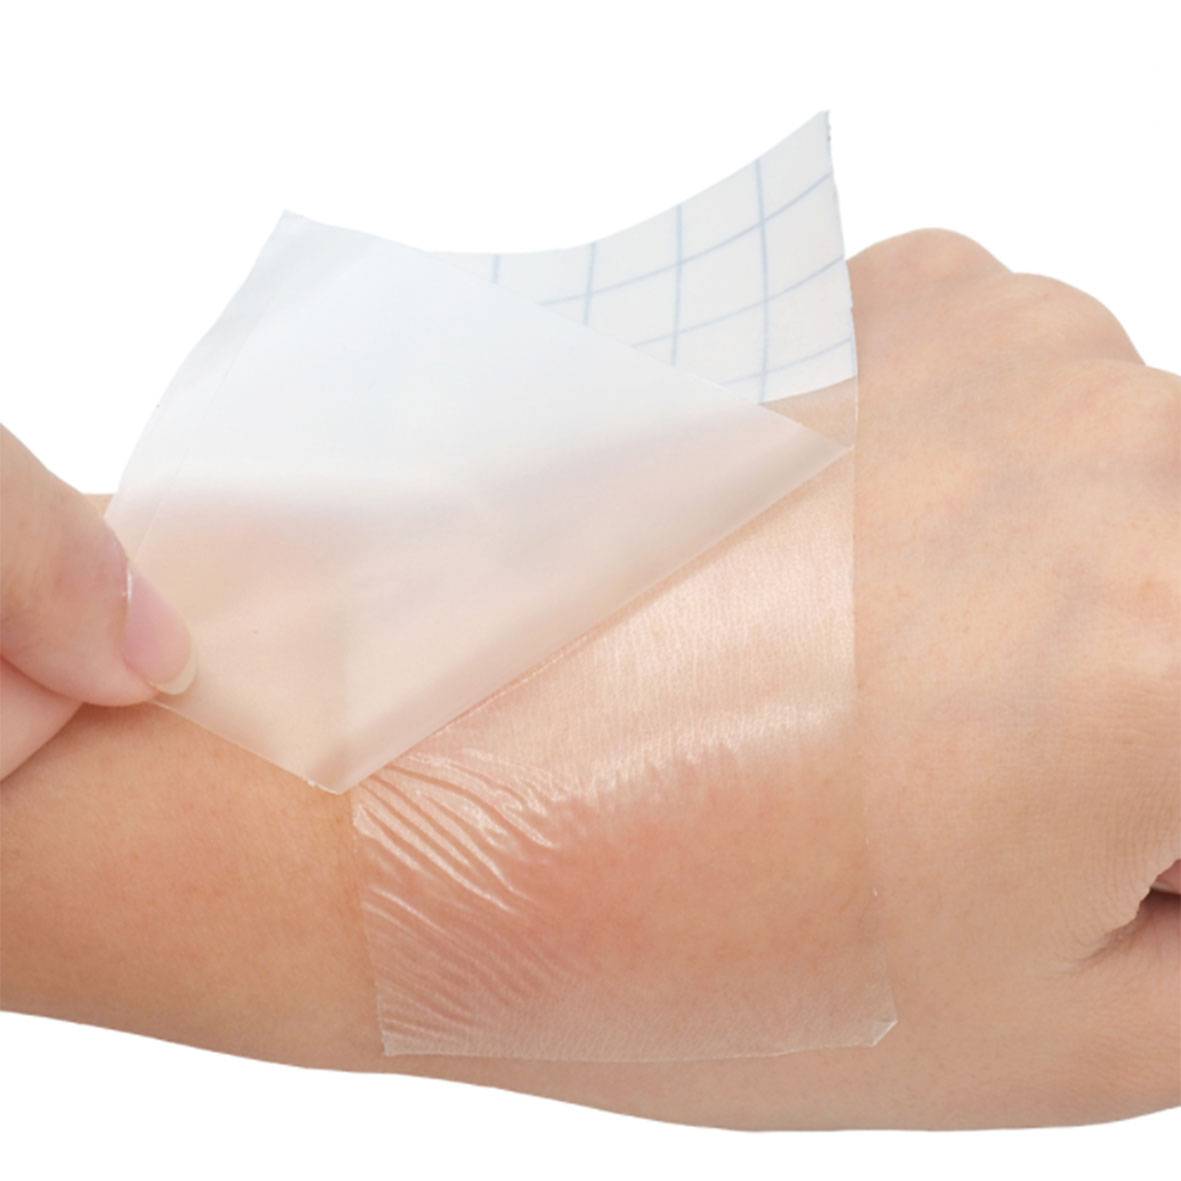 ODM Discount Wound Dressing Suppliers –  Disposable PU waterproof medical Transparent wound dressing – Alps Medical